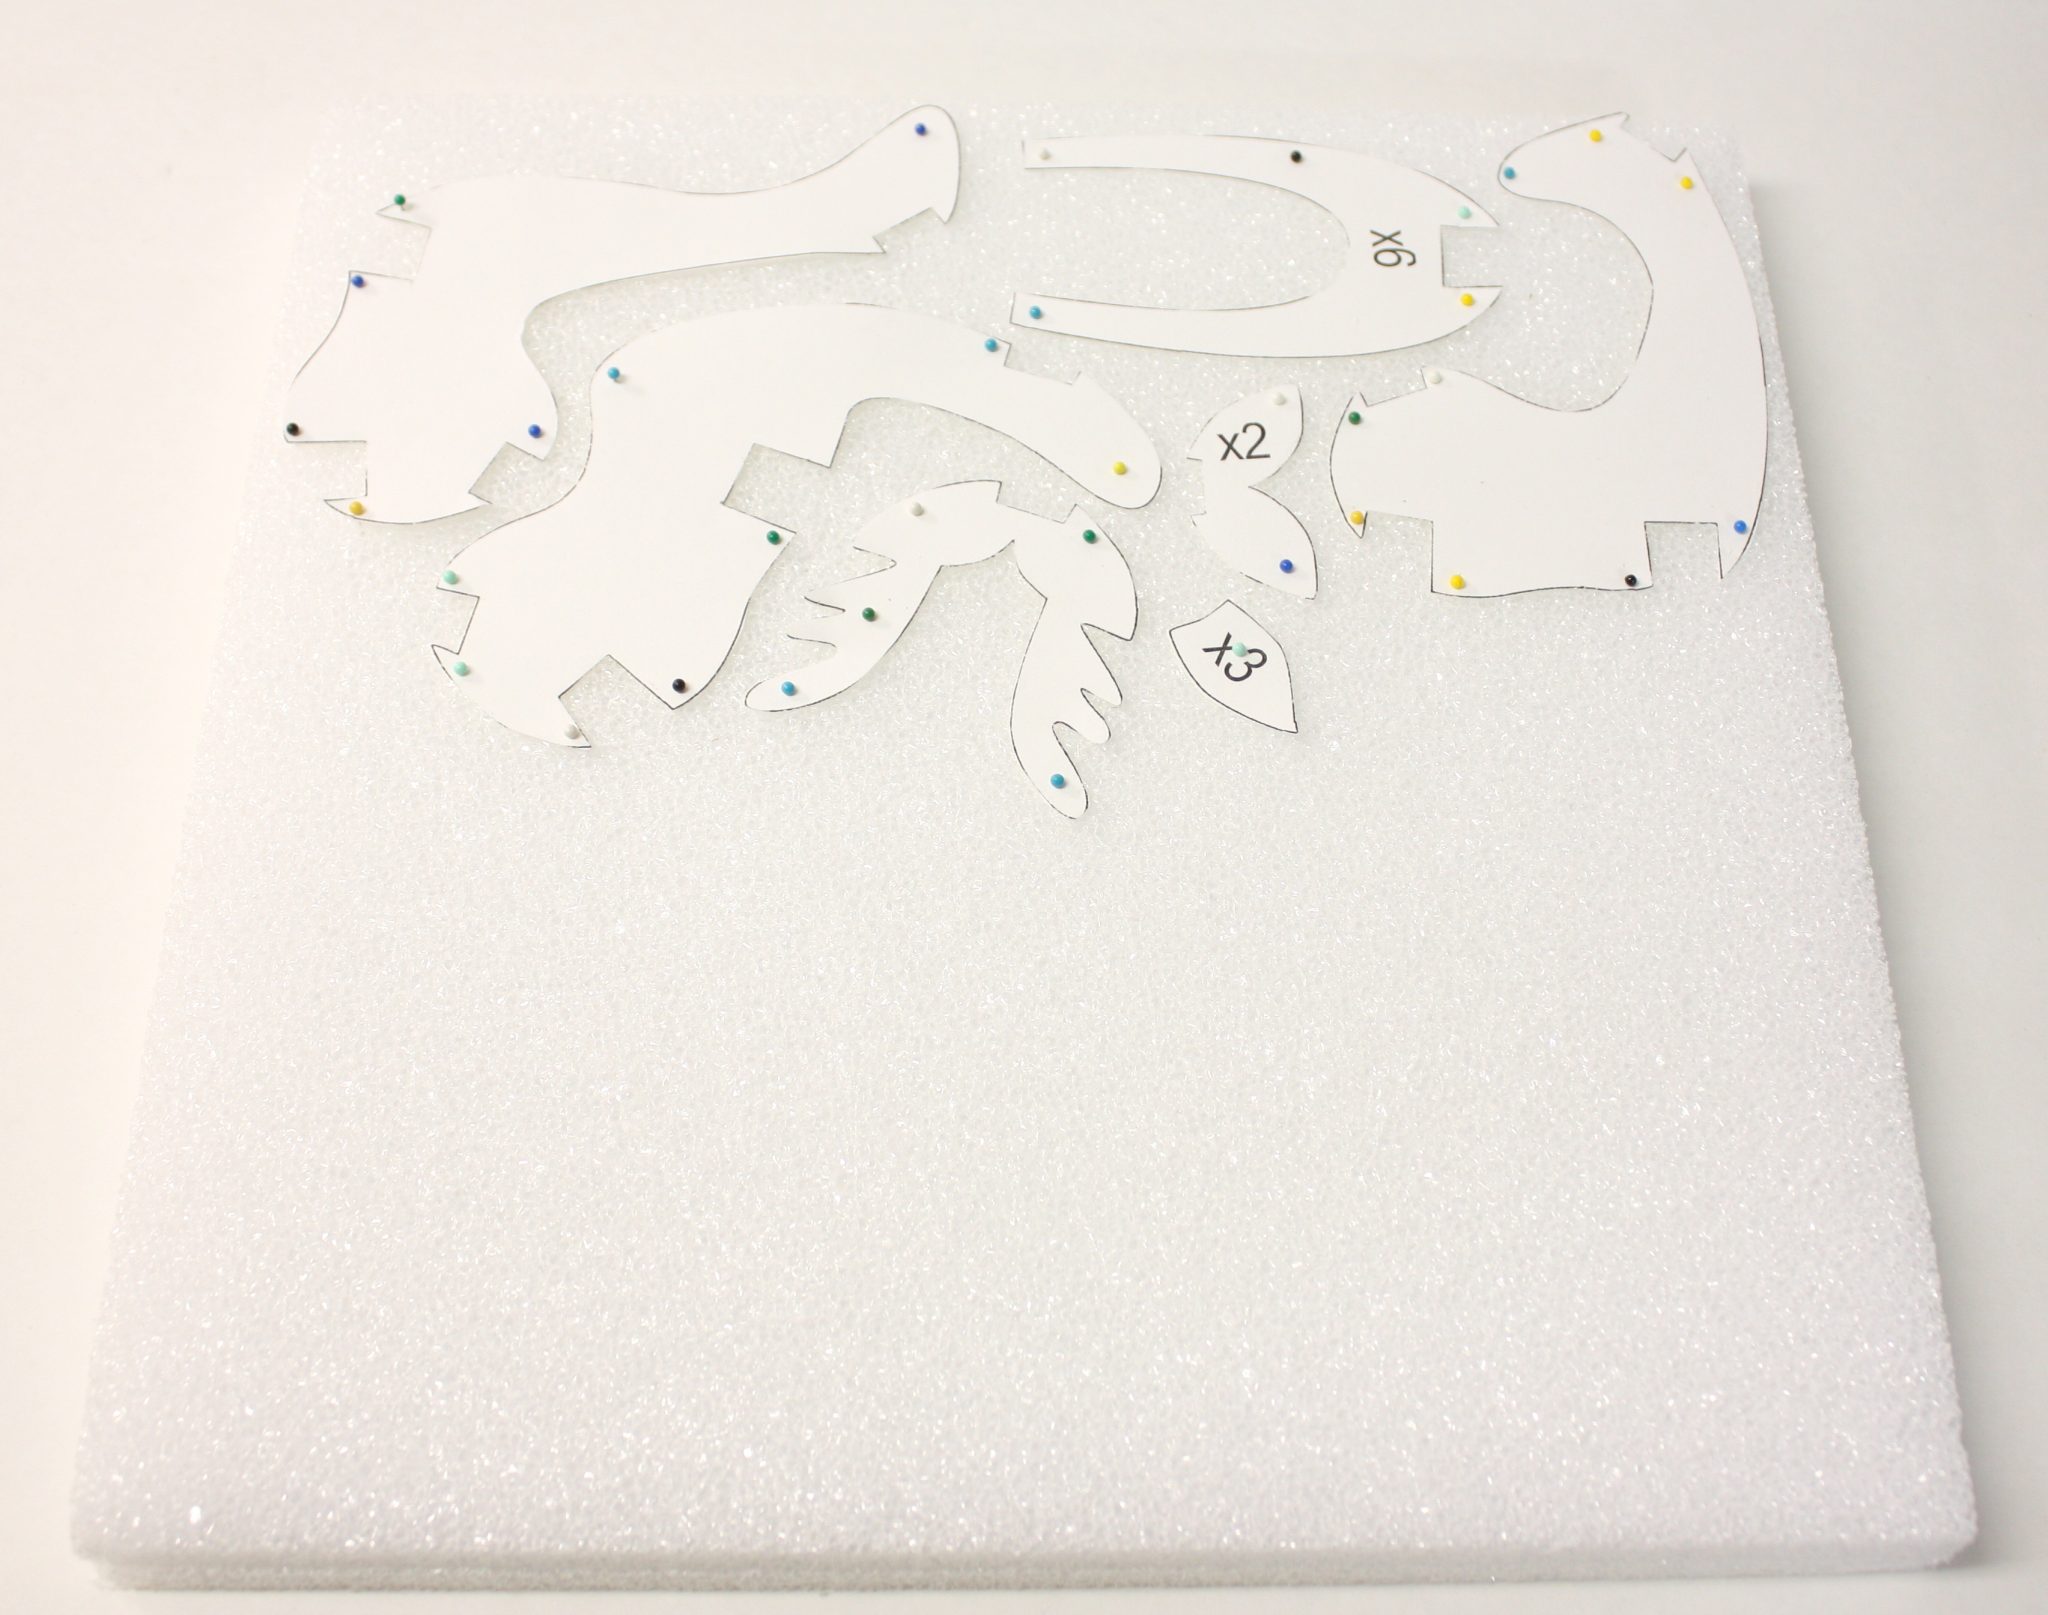 Styrofoam sheet with reindeer template pieces pinned to it.